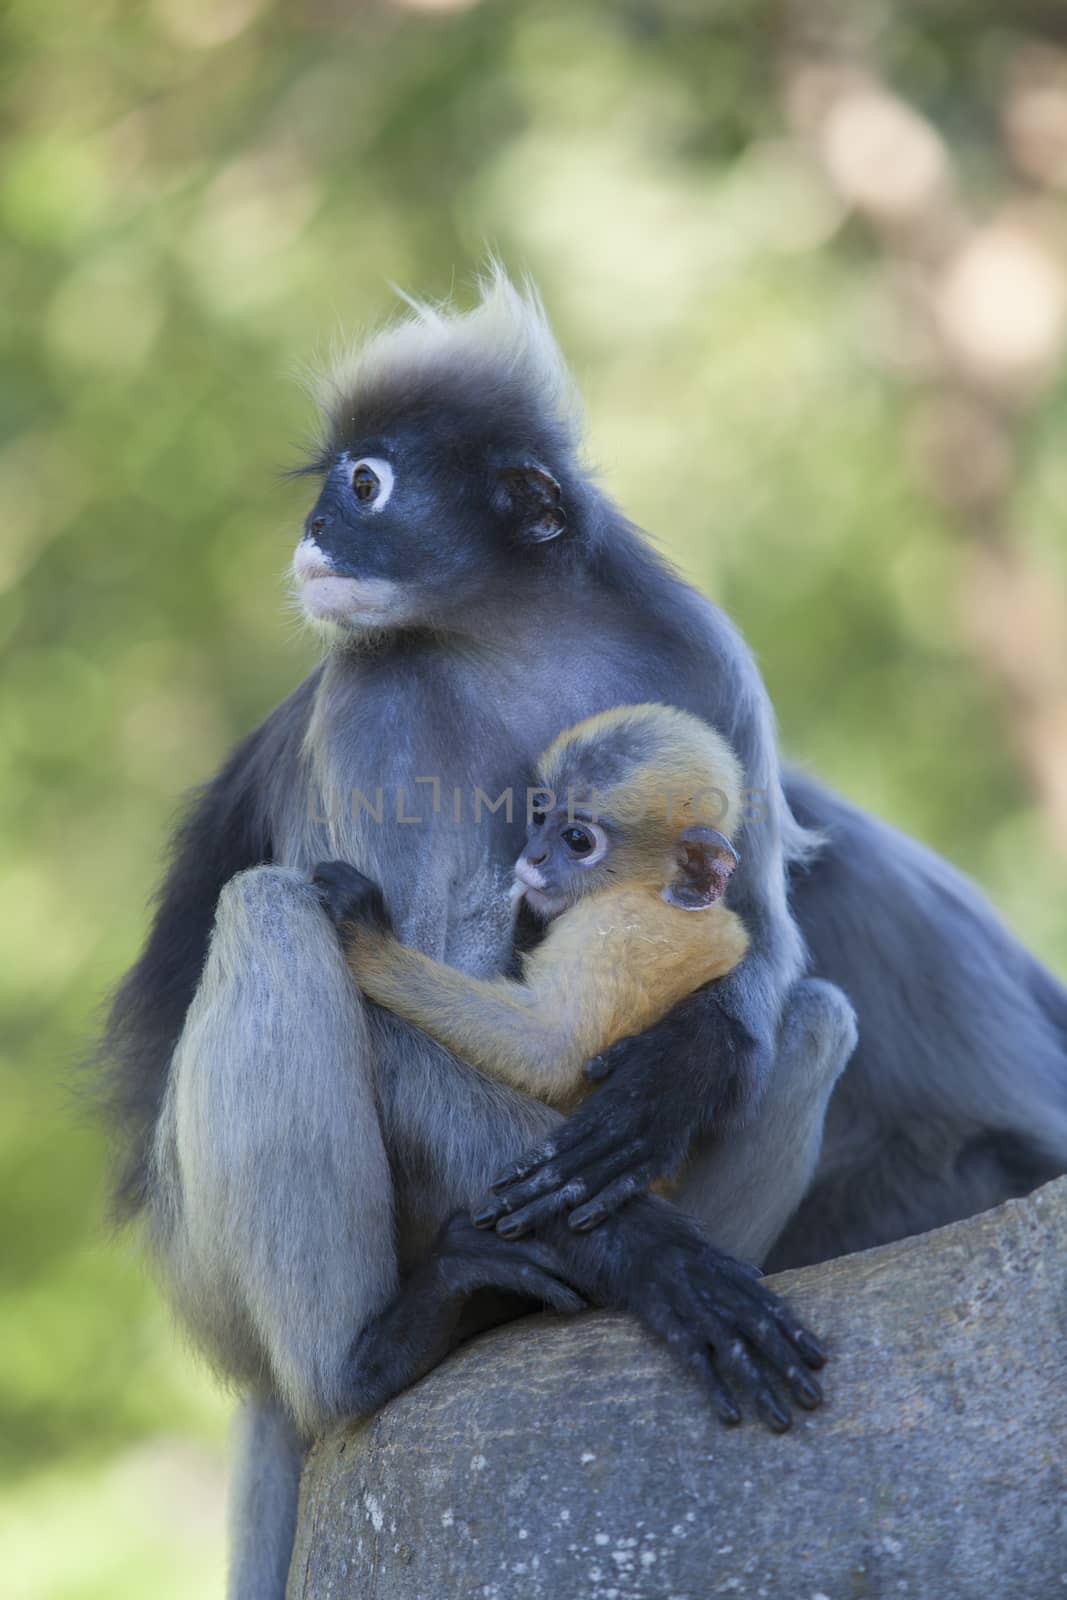 The dusky leaf monkey, spectacled langur, or spectacled leaf monkey (Trachypithecus obscurus),A mother Dusky Leaf monkey and its yellow baby.